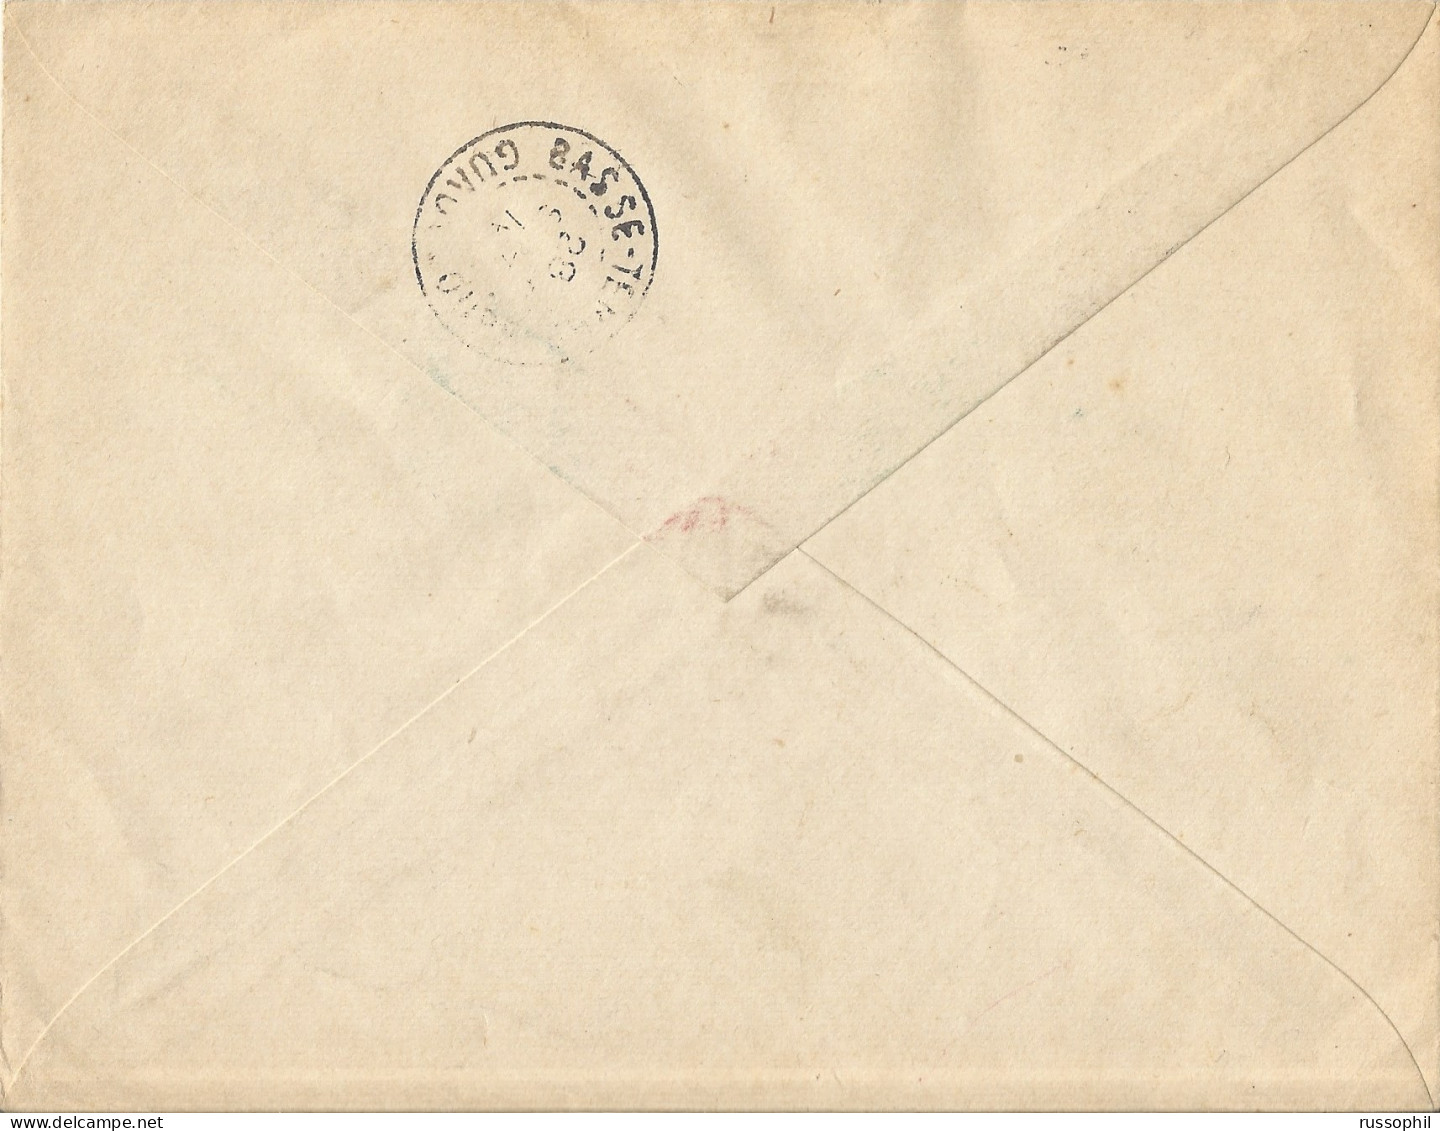 GUADELOUPE - FDC - 3 FR. 30 CENT. 5 STAMP FRANKING ON COVER FROM POINTE A PITRE TO BASSE TERRE - 27 SEPT 1943 - Storia Postale